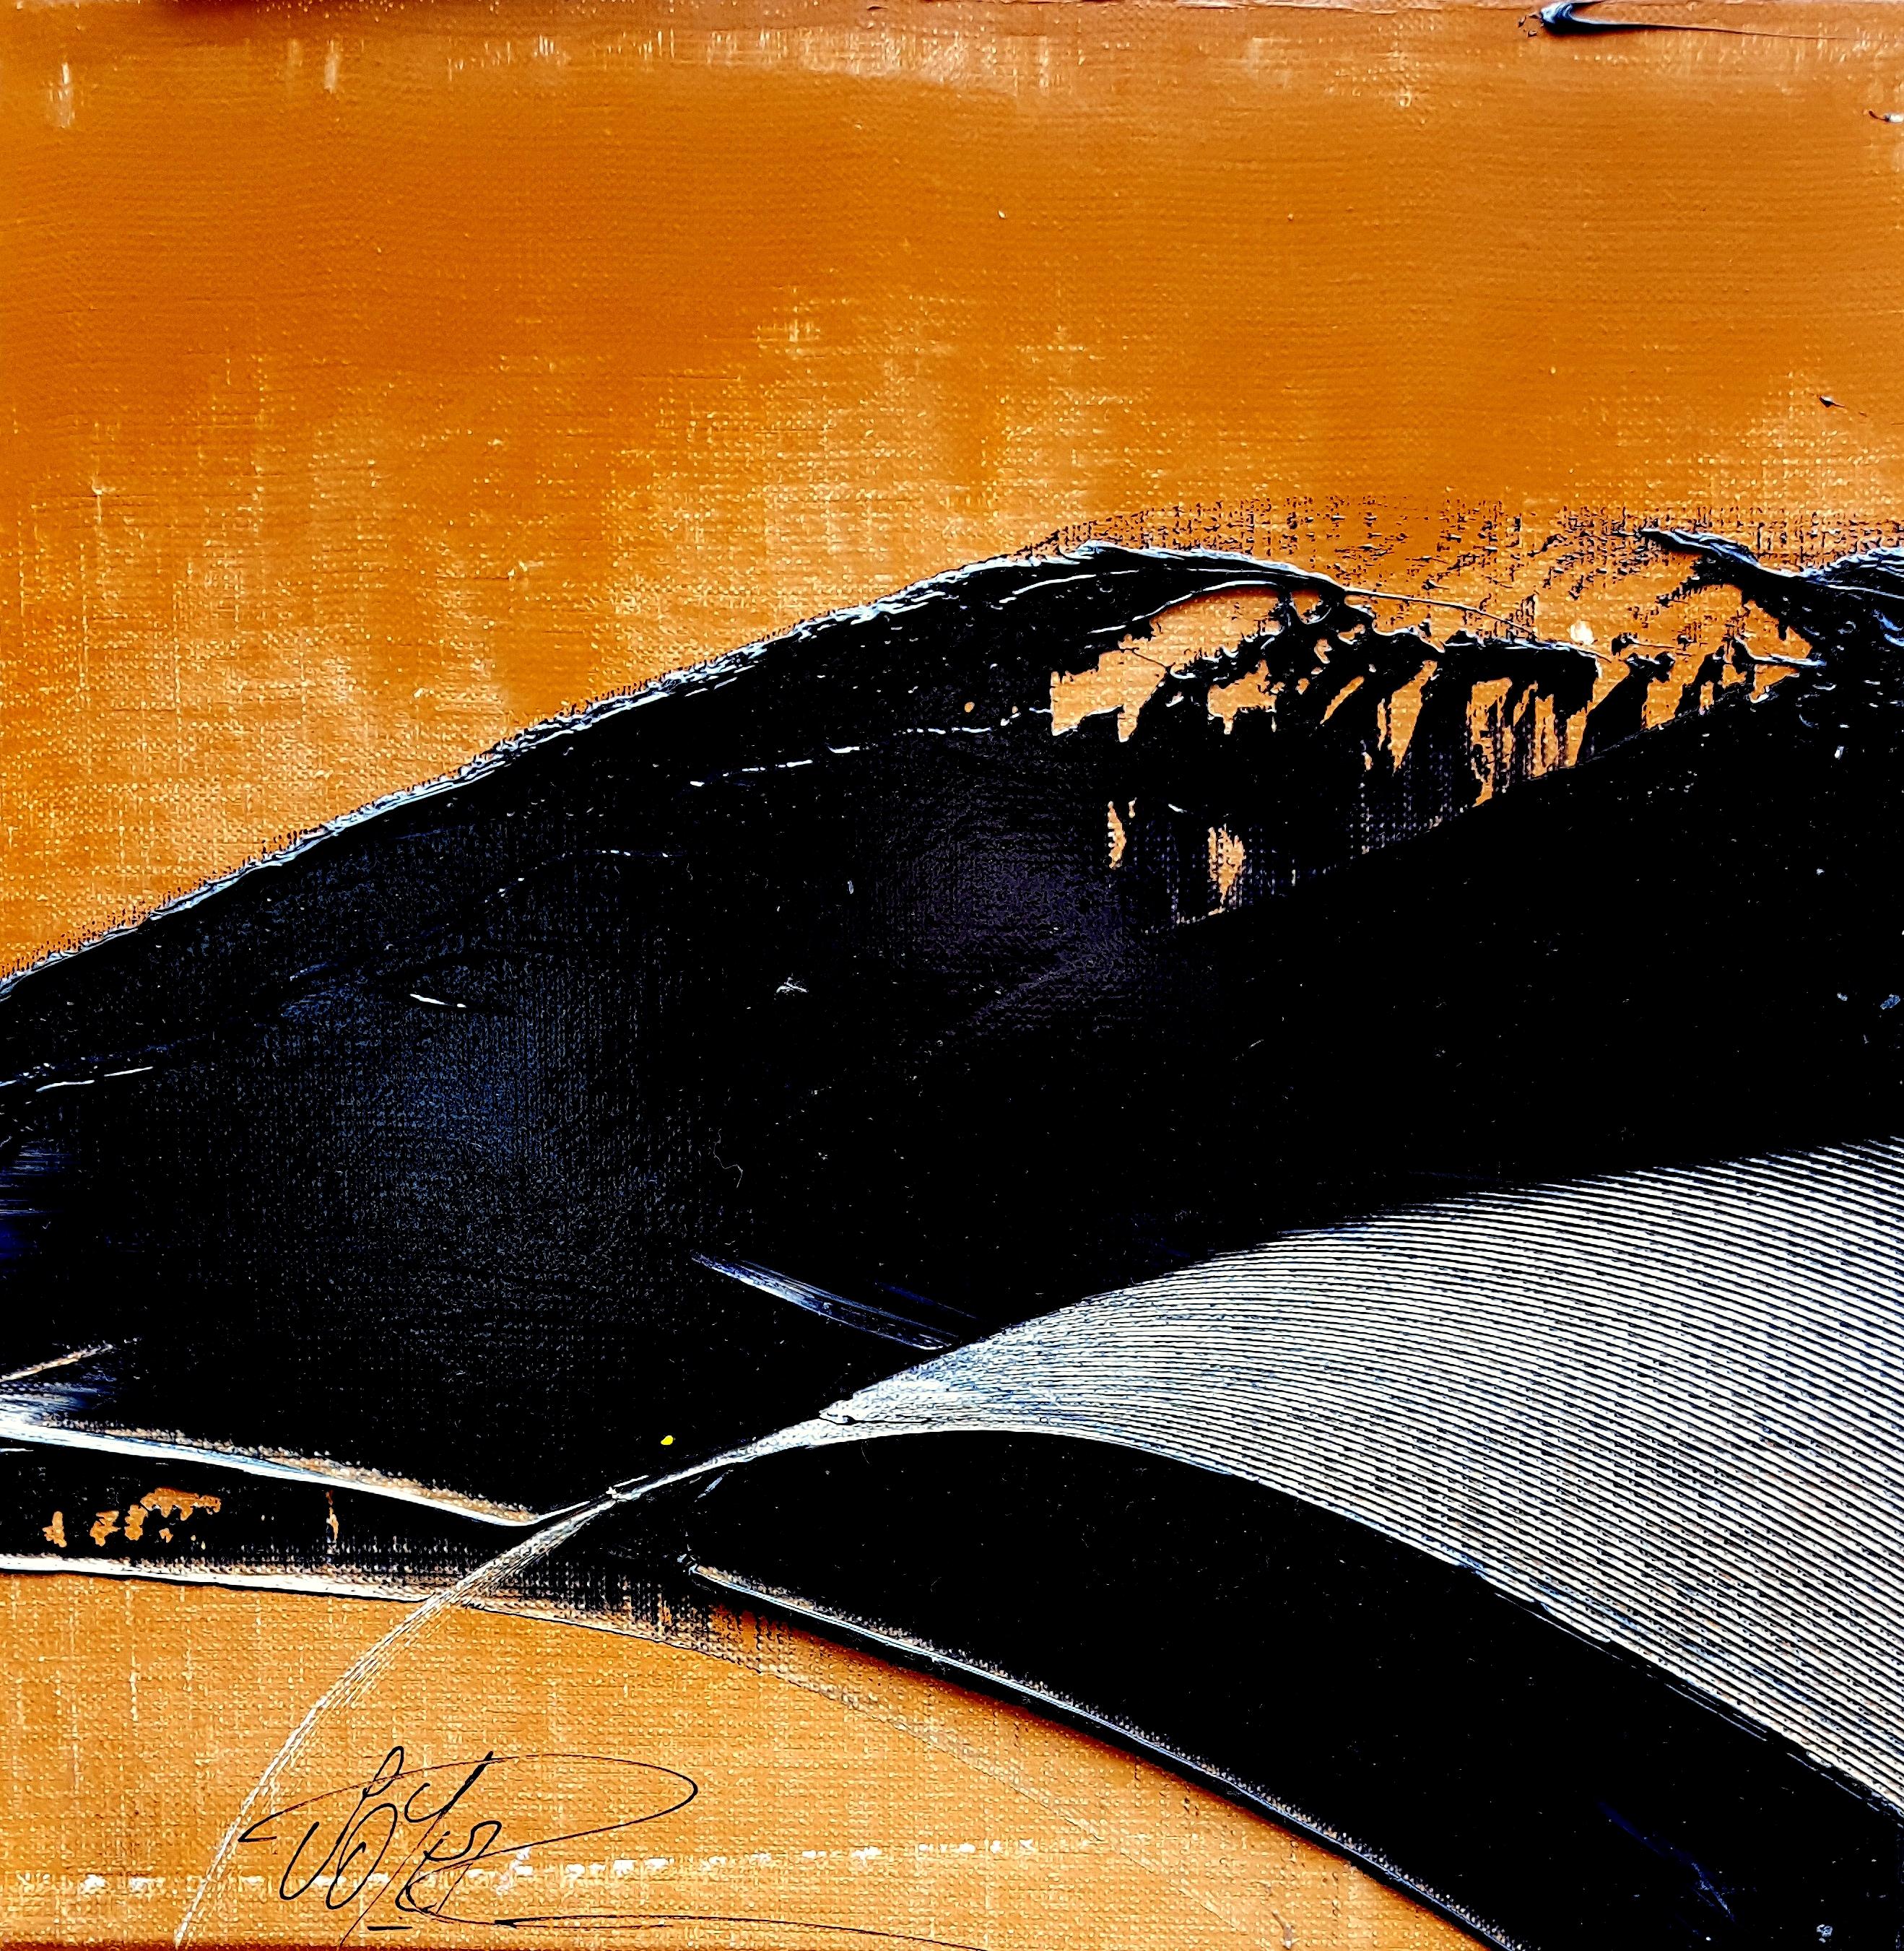 Small Black Wave on Ochre Background Abstract Landscape Oil Painting